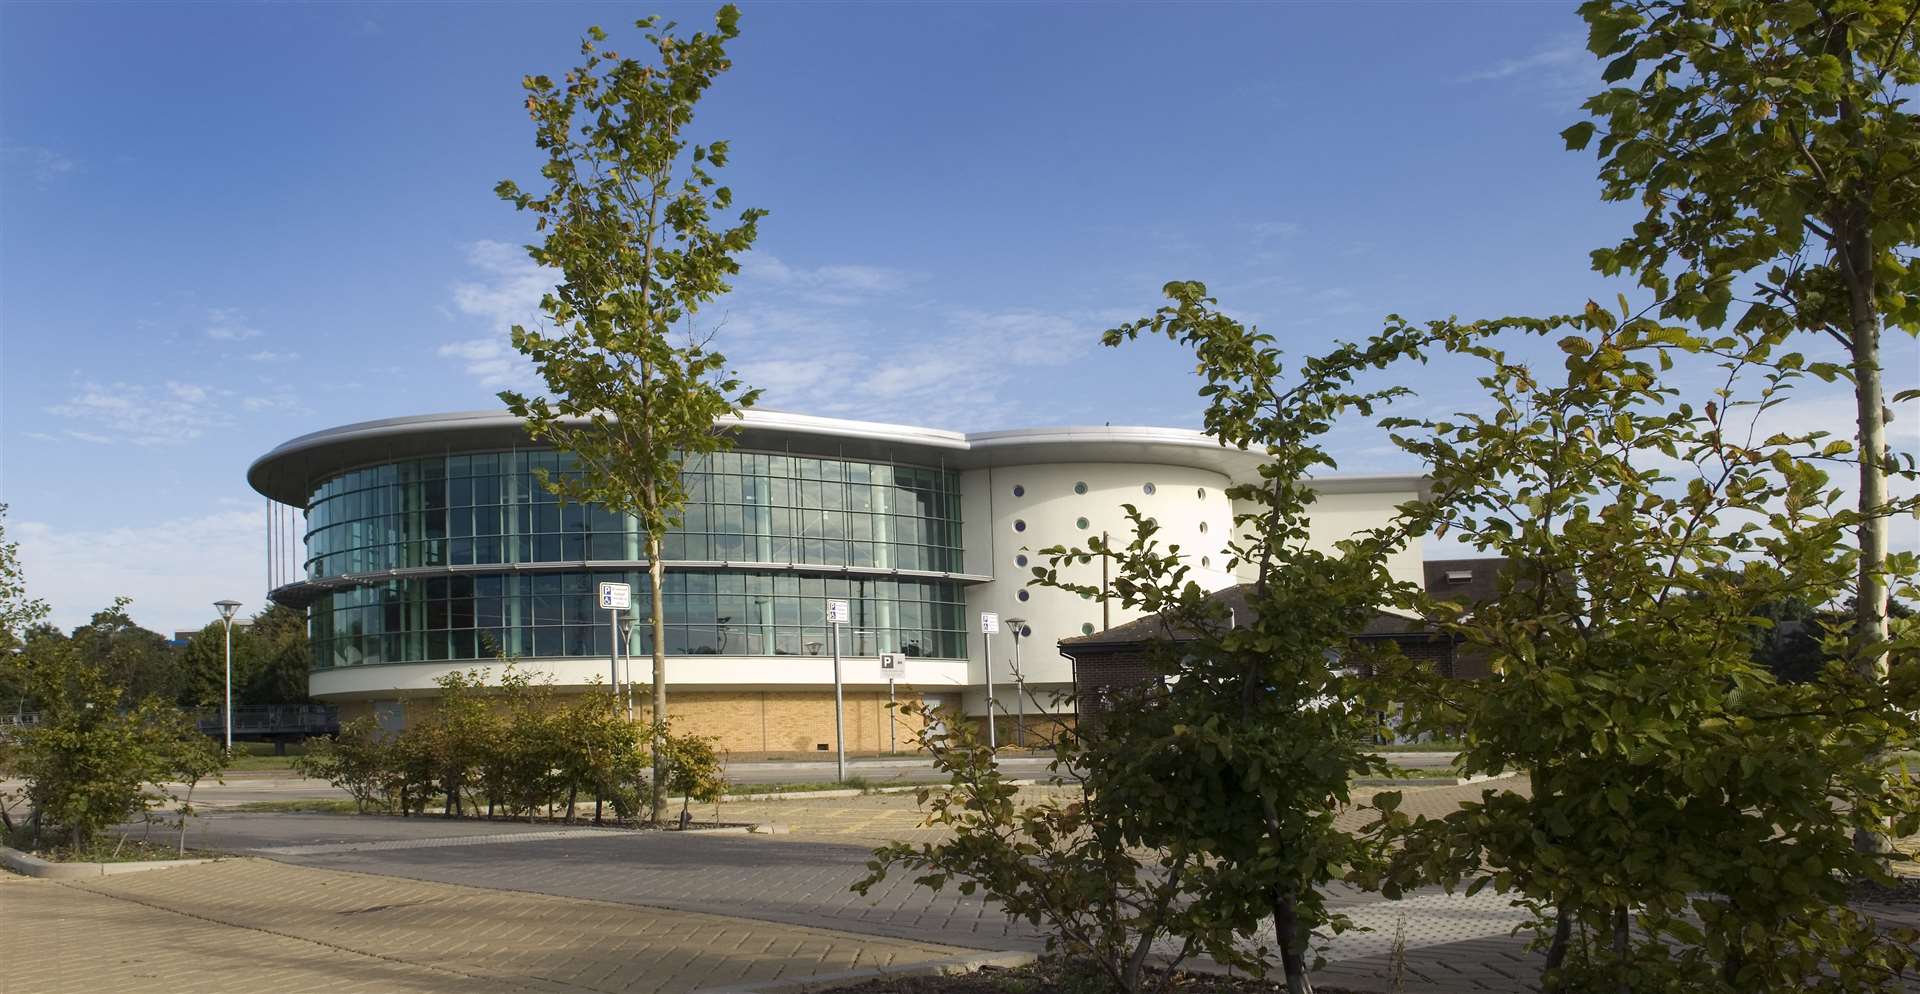 The Stour Centre was extensively remodelled in 2007